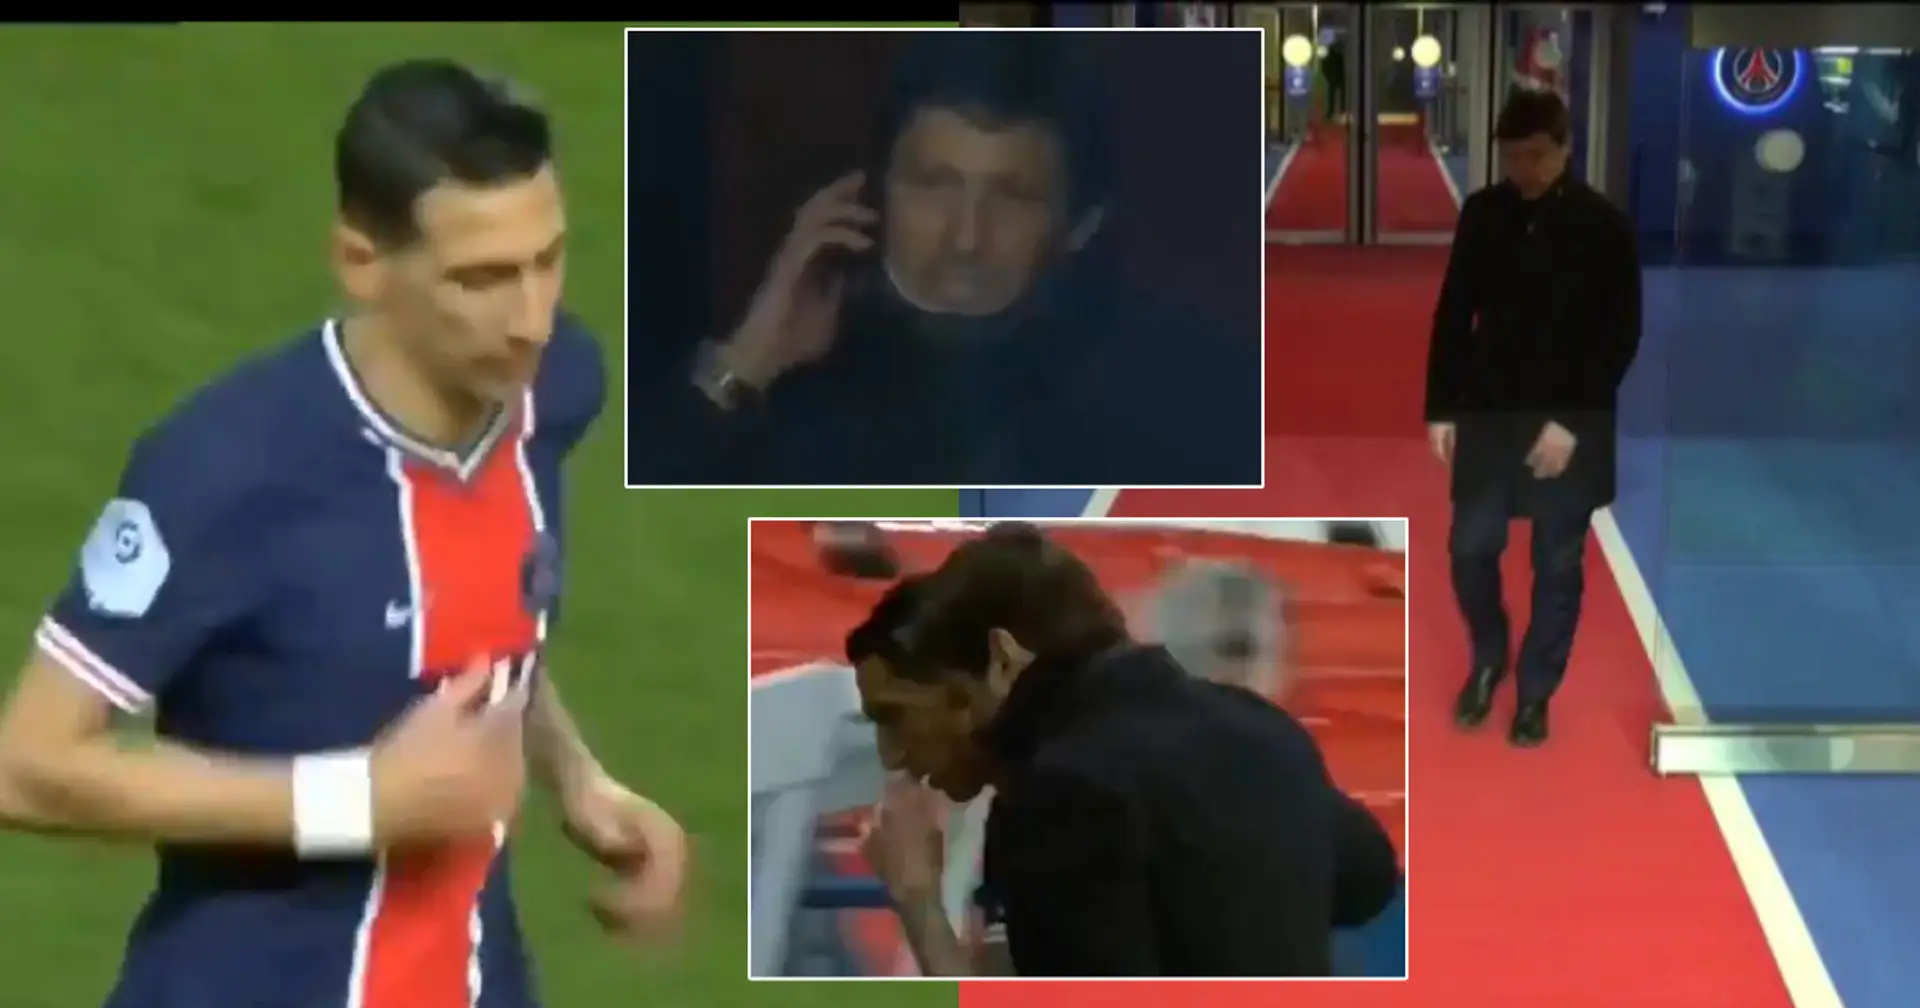 Di Maria told his house being robbed with family inside DURING game, gets subbed off immediately